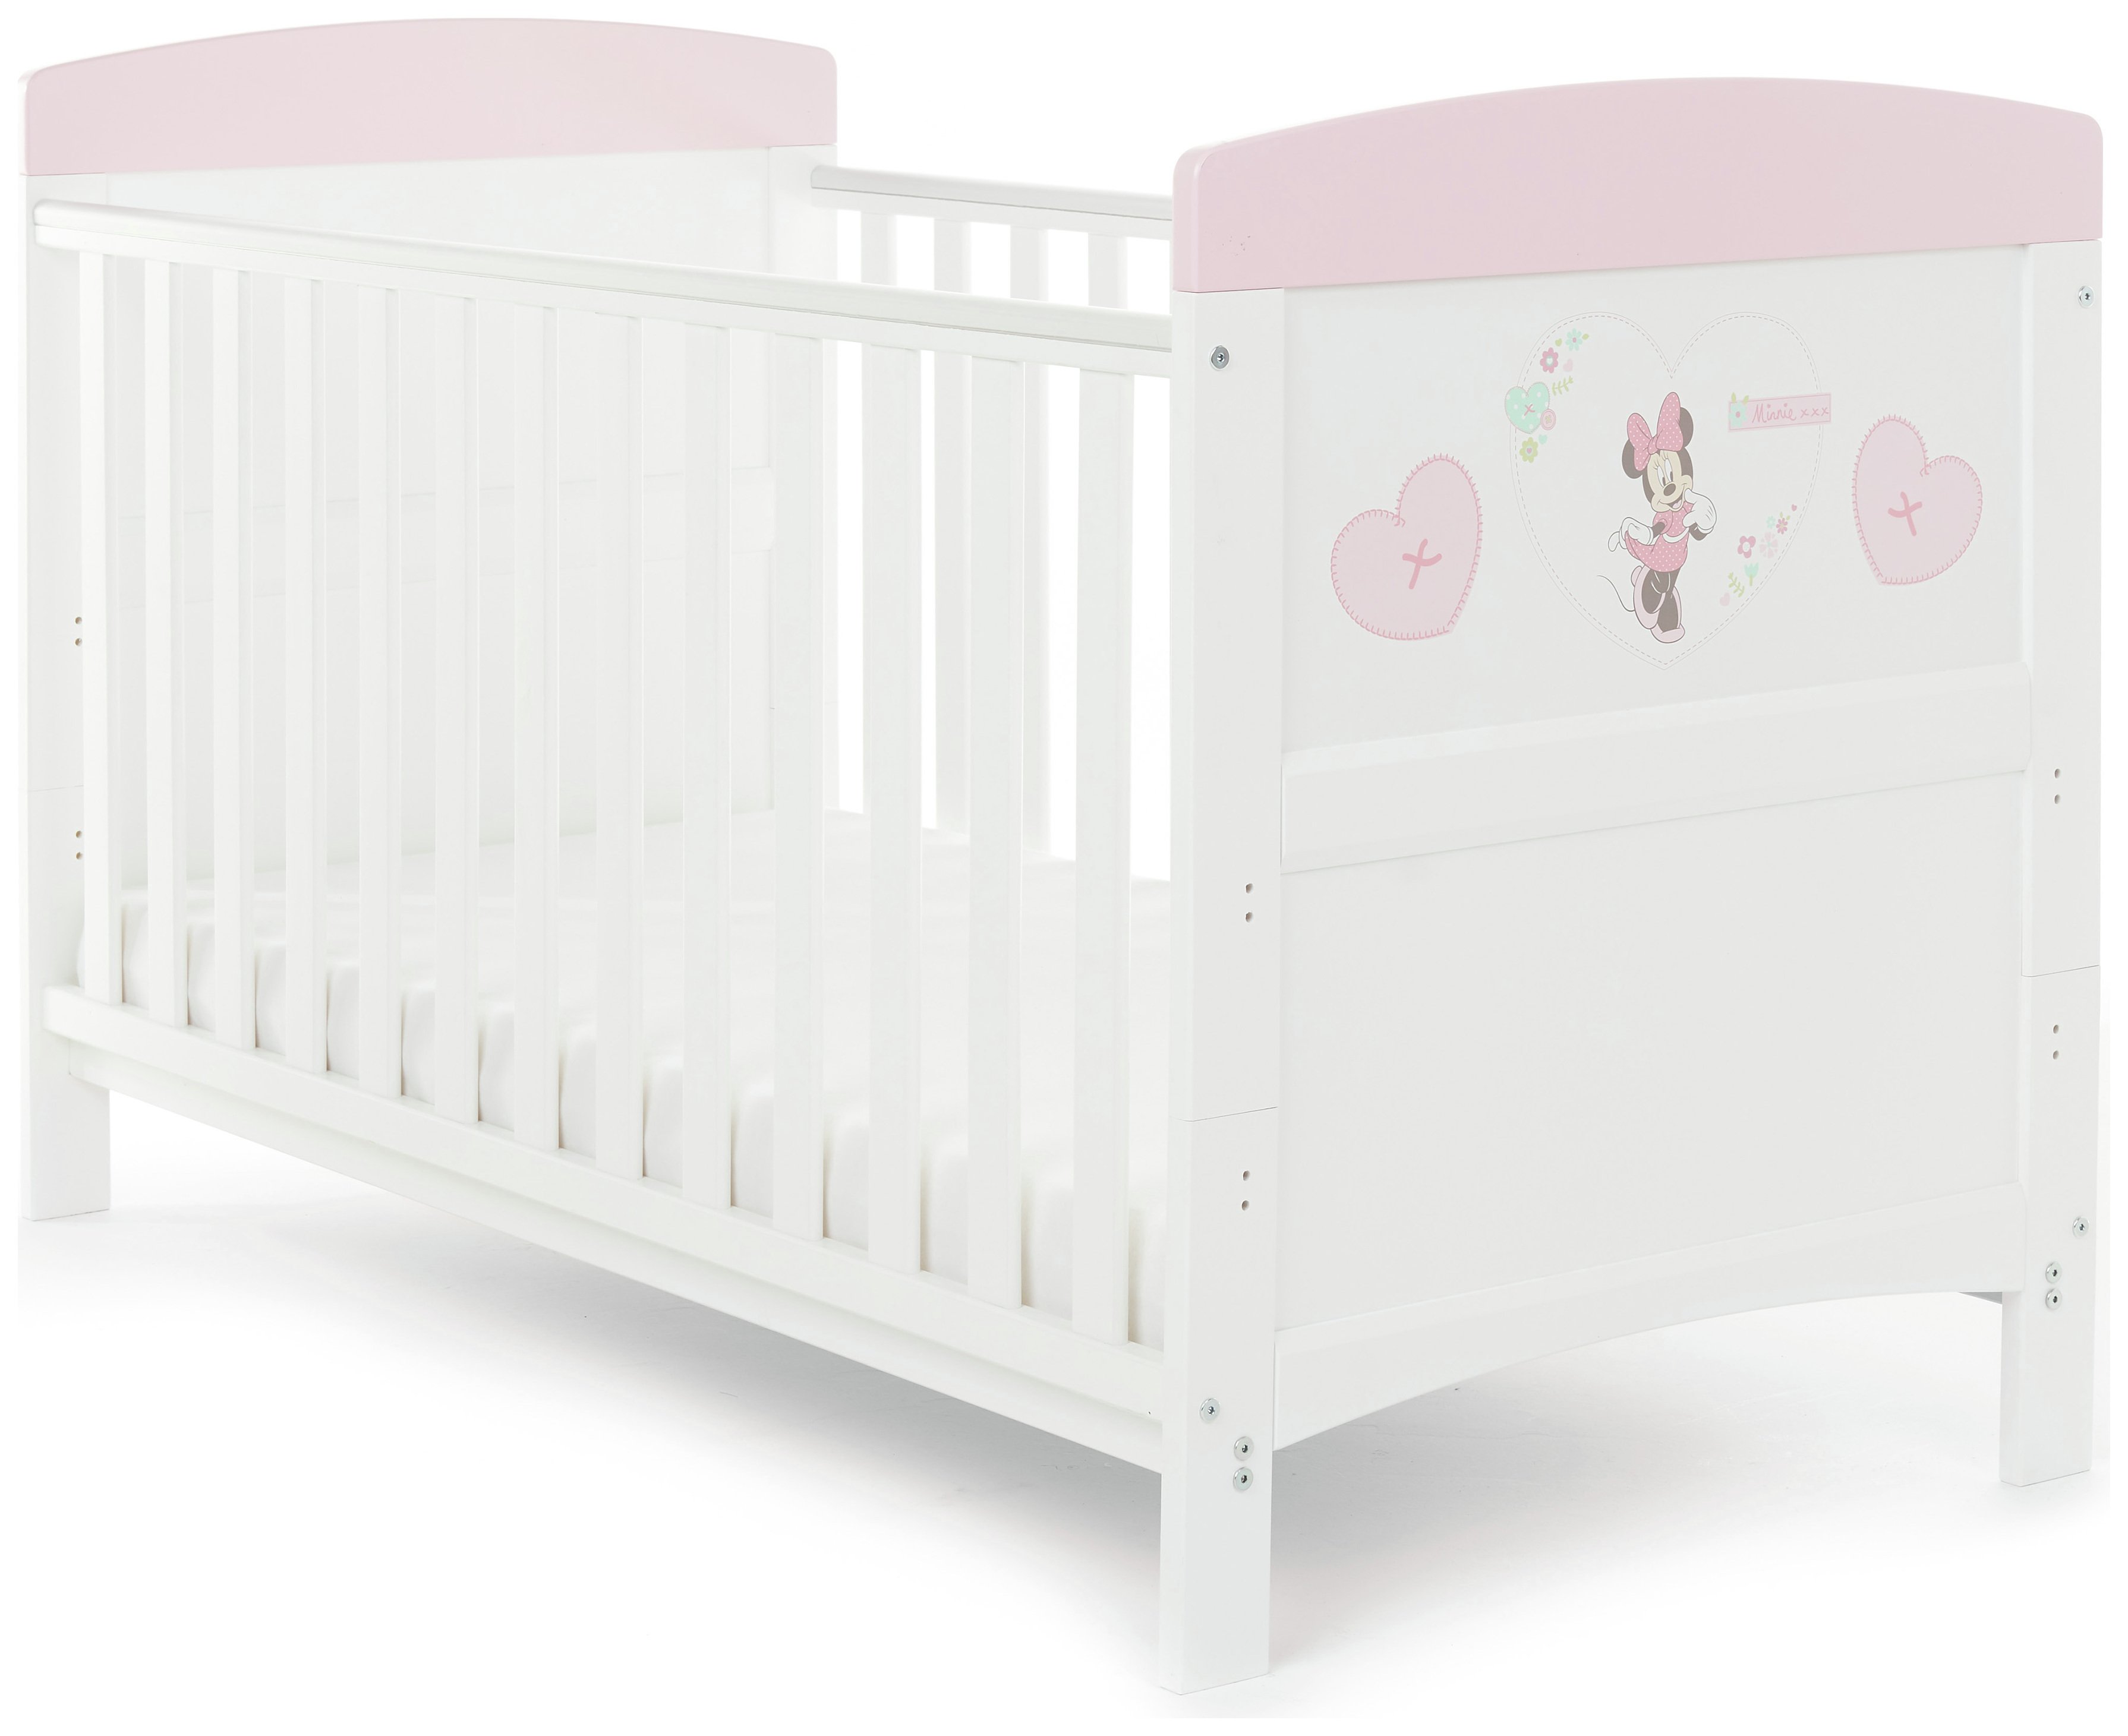 Disney Minnie Mouse Cot Bed Review